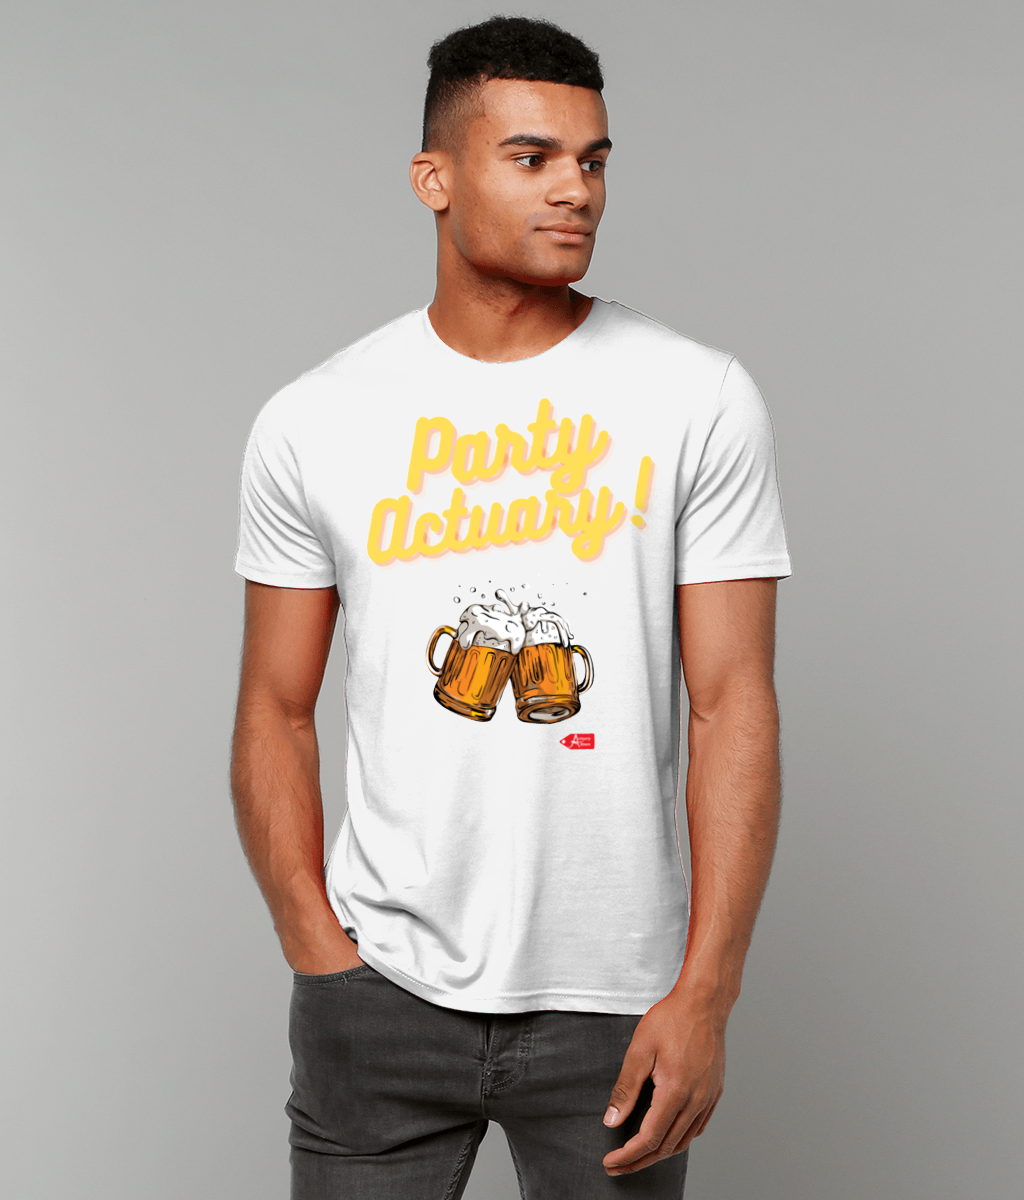 Party Actuary Beer Glasses T-Shirt (White and Black Variants)